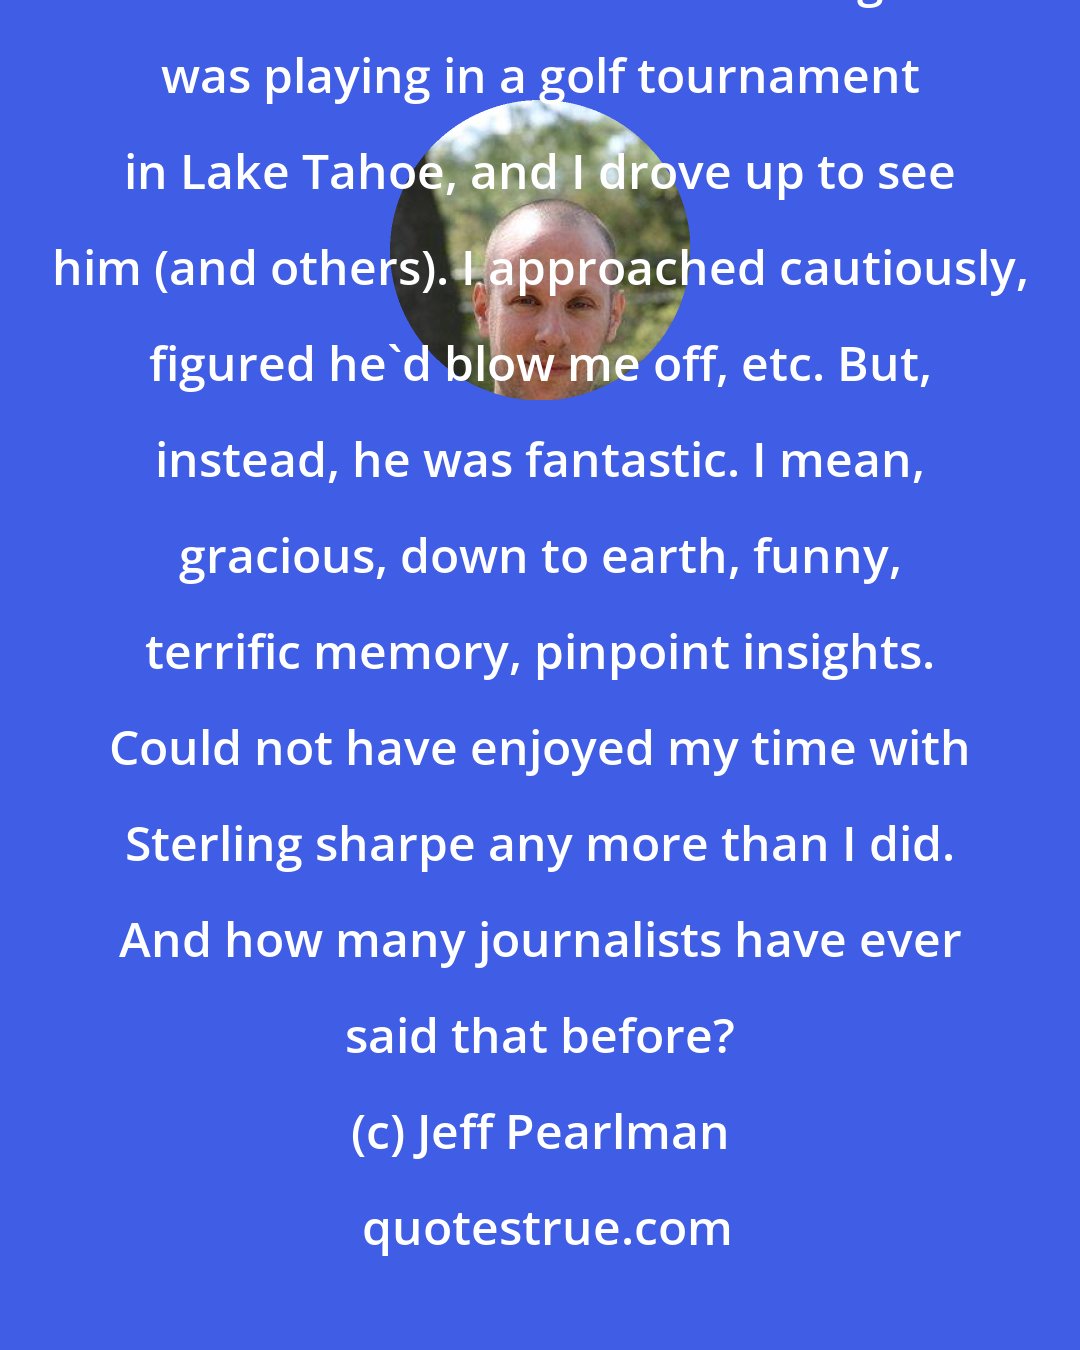 Jeff Pearlman: Another riveting one was Sterling Sharpe - mainly because everyone told me he's horrible. Sterling was playing in a golf tournament in Lake Tahoe, and I drove up to see him (and others). I approached cautiously, figured he'd blow me off, etc. But, instead, he was fantastic. I mean, gracious, down to earth, funny, terrific memory, pinpoint insights. Could not have enjoyed my time with Sterling sharpe any more than I did. And how many journalists have ever said that before?